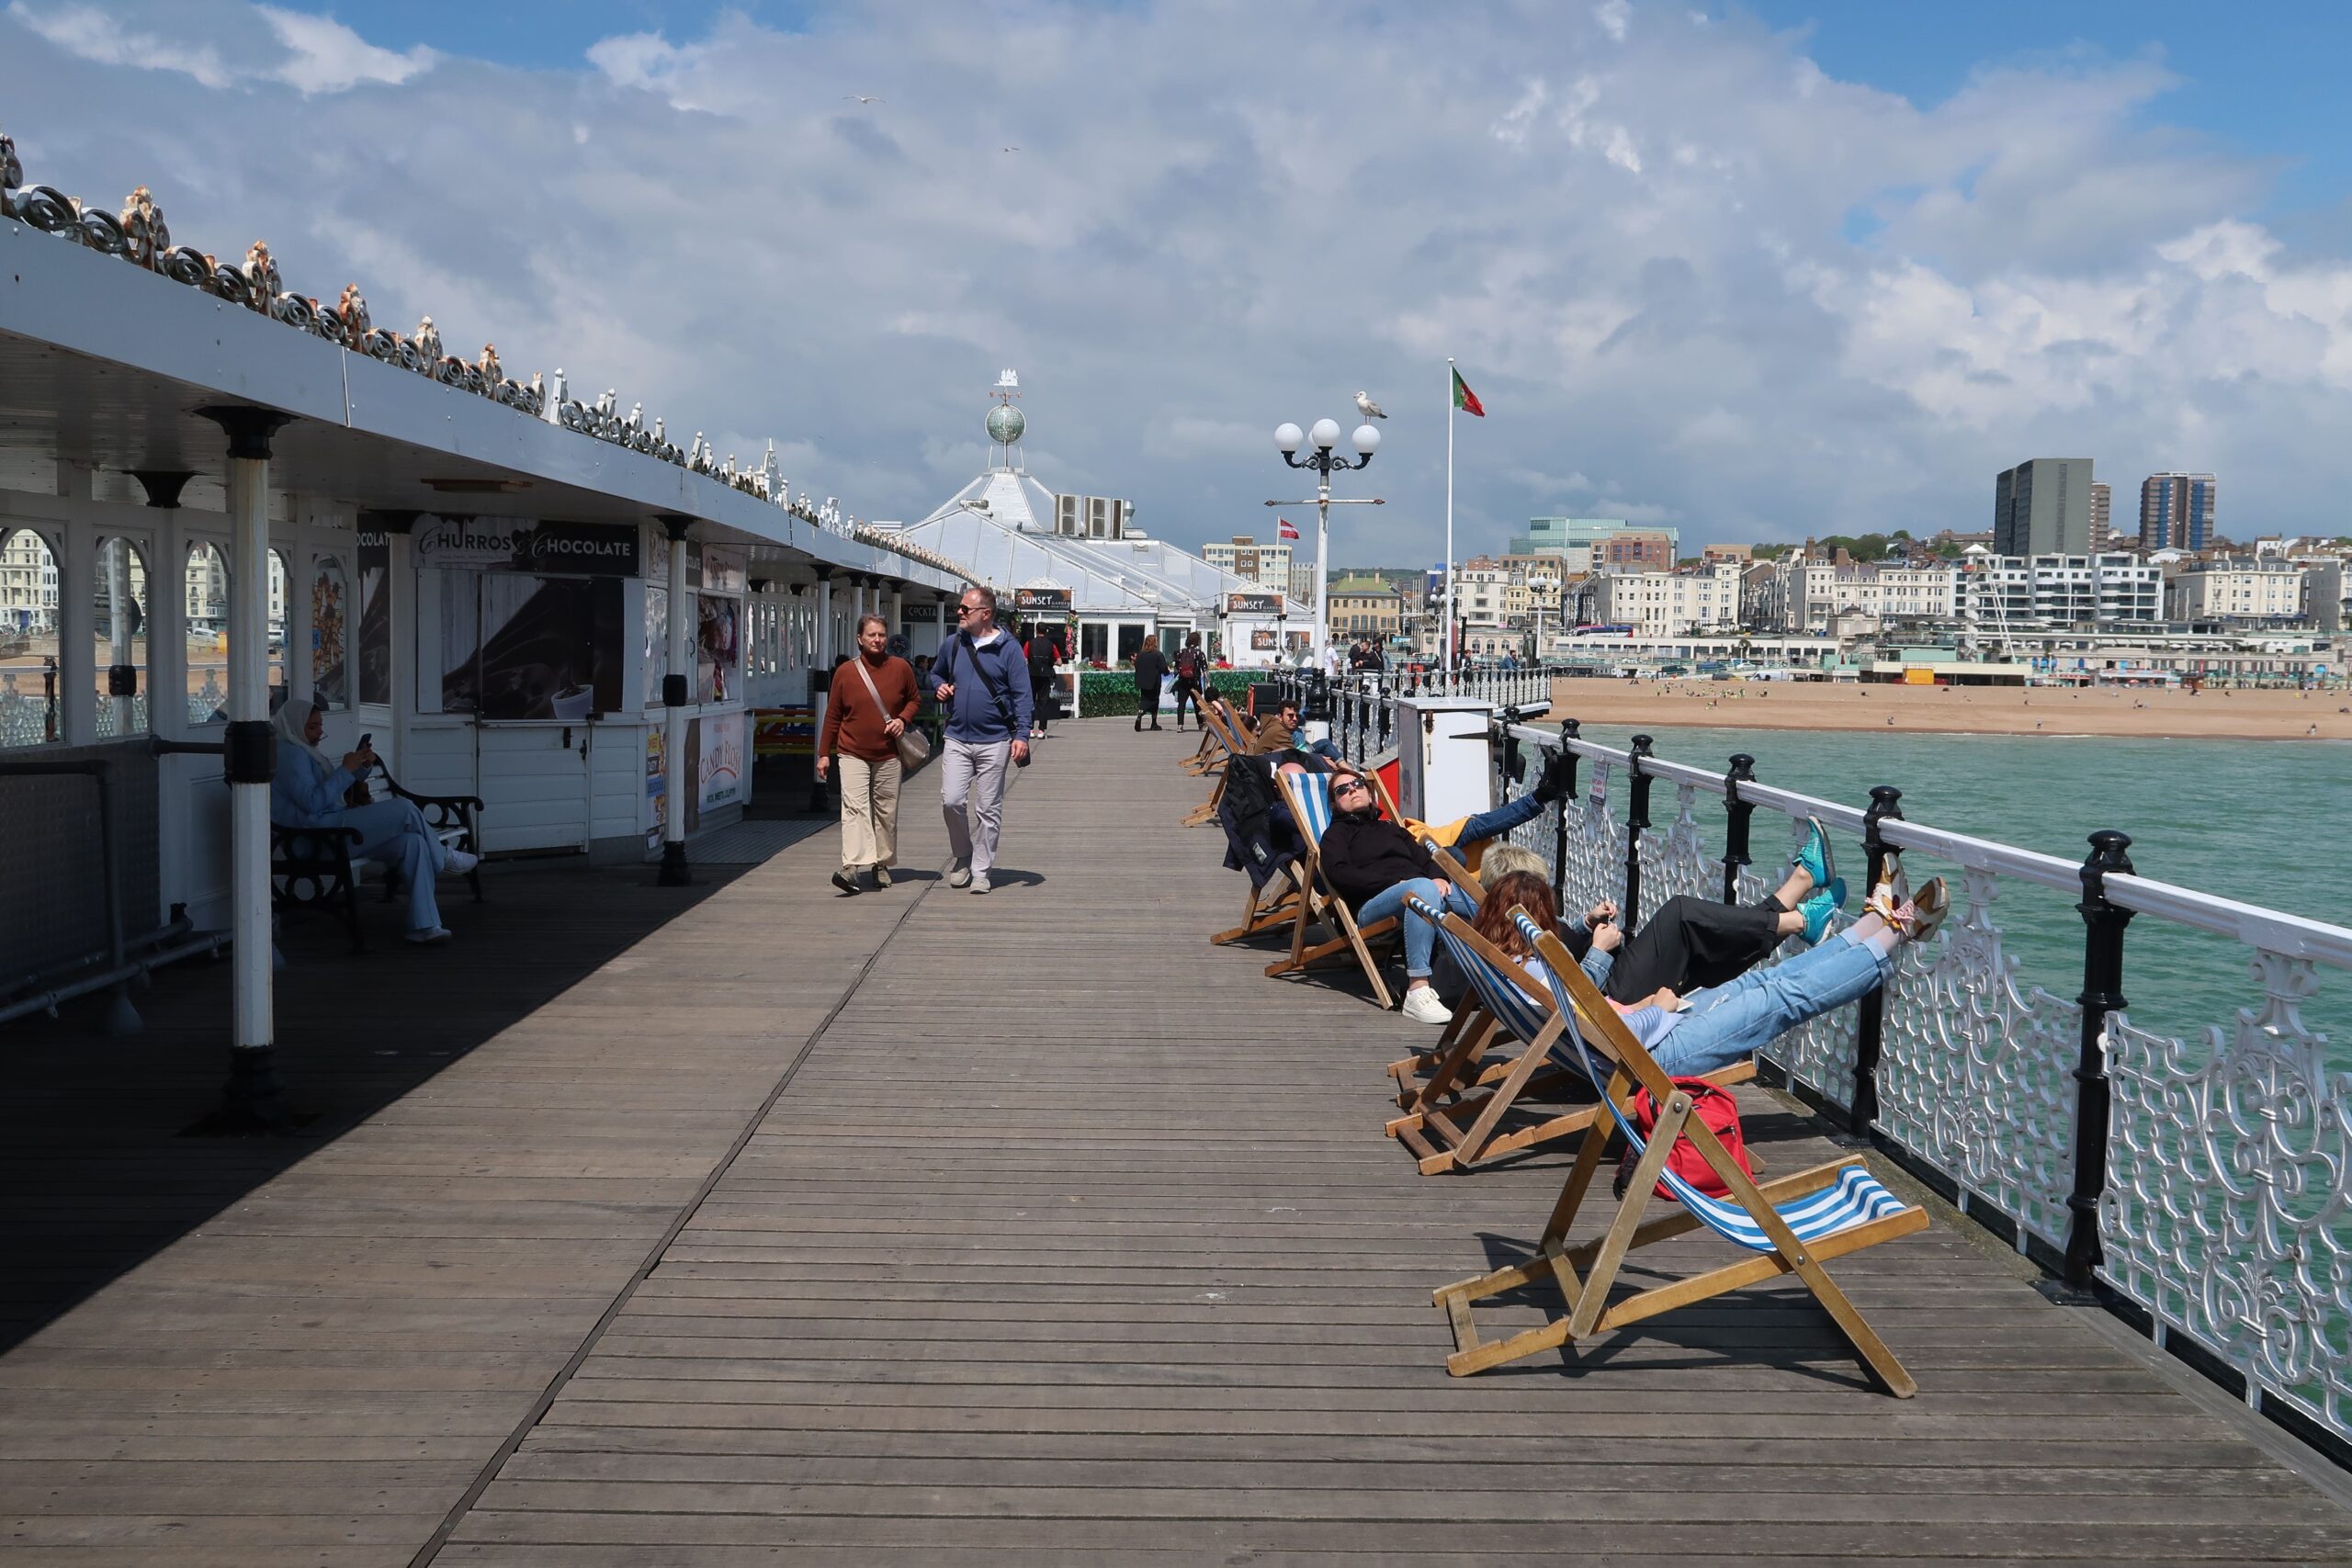 brighton pier day trip from london 1 hour via train easy things to see and do photo spots viewpoints the lanes royal pavilion